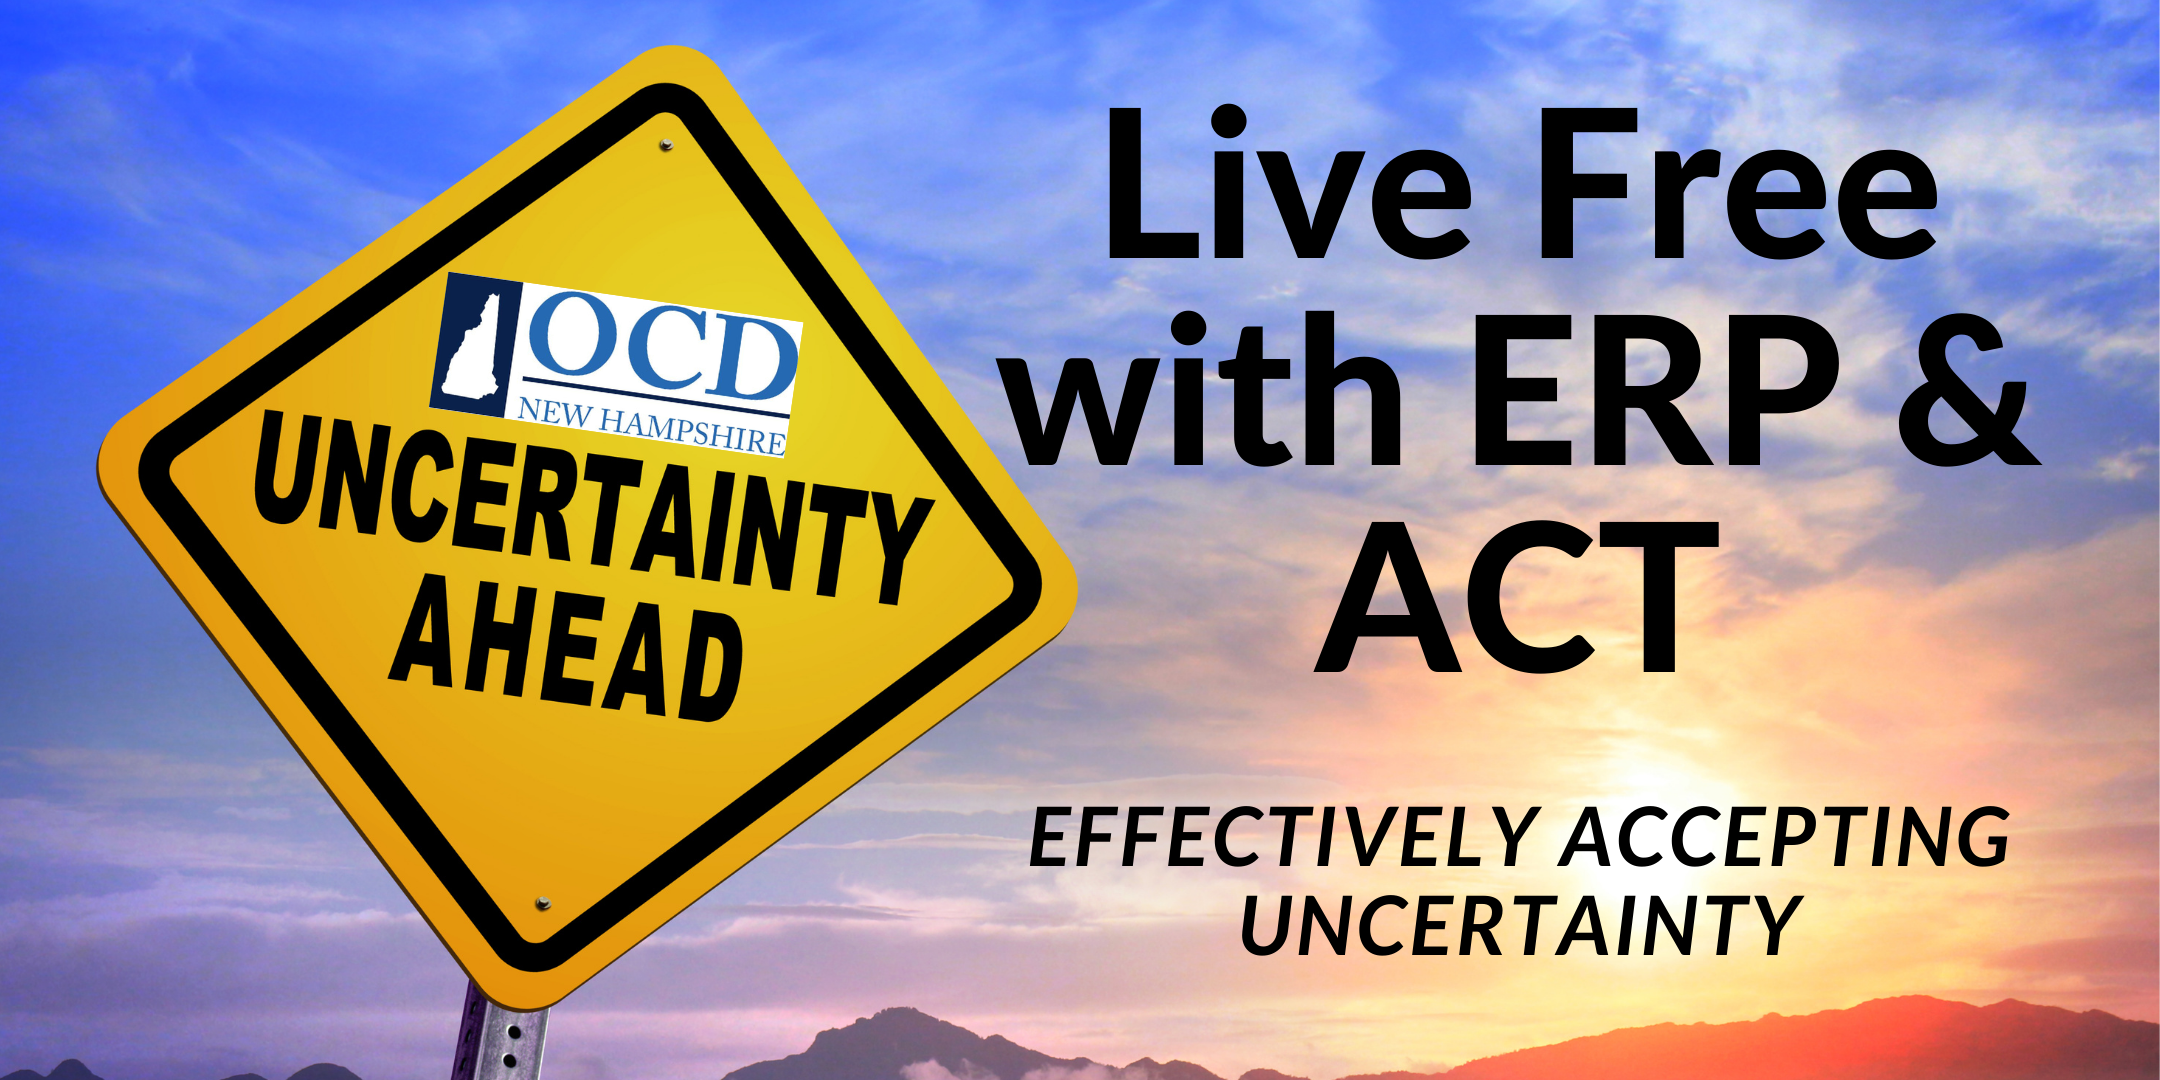 Live Free with ERP & ACT: Effectively Accepting Uncertainty